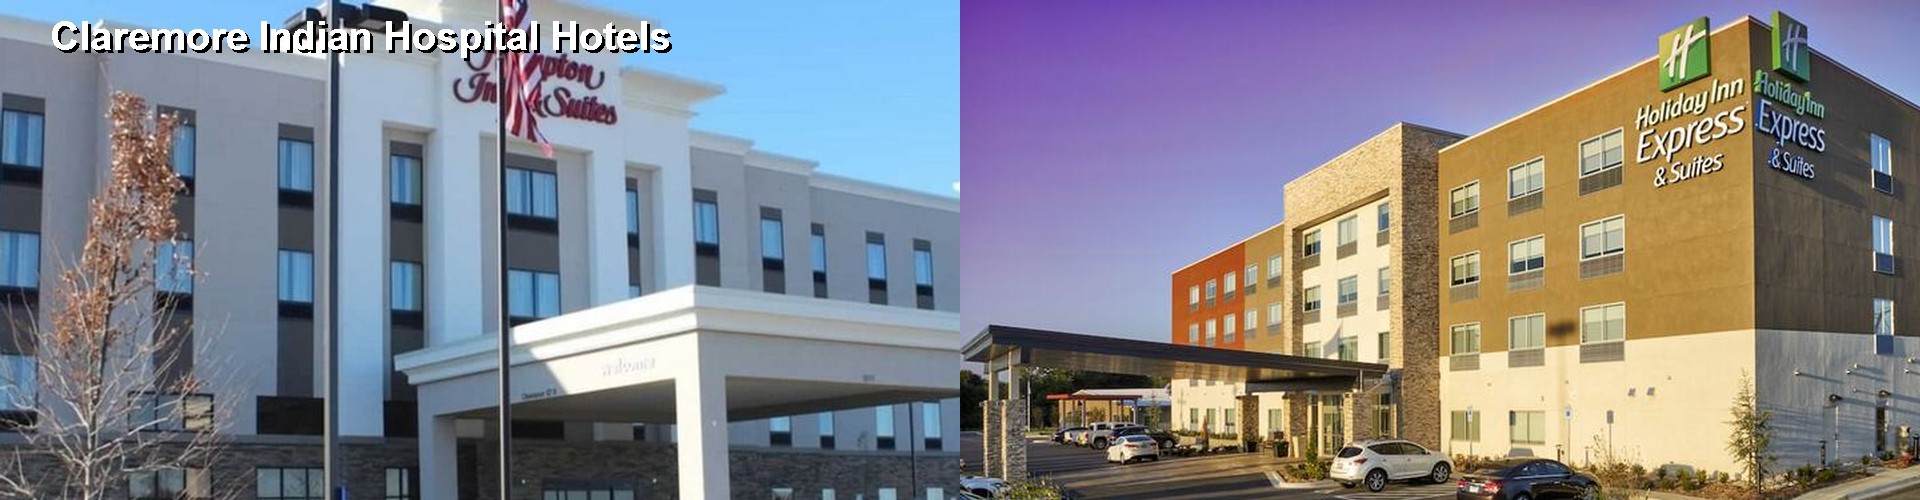 5 Best Hotels near Claremore Indian Hospital